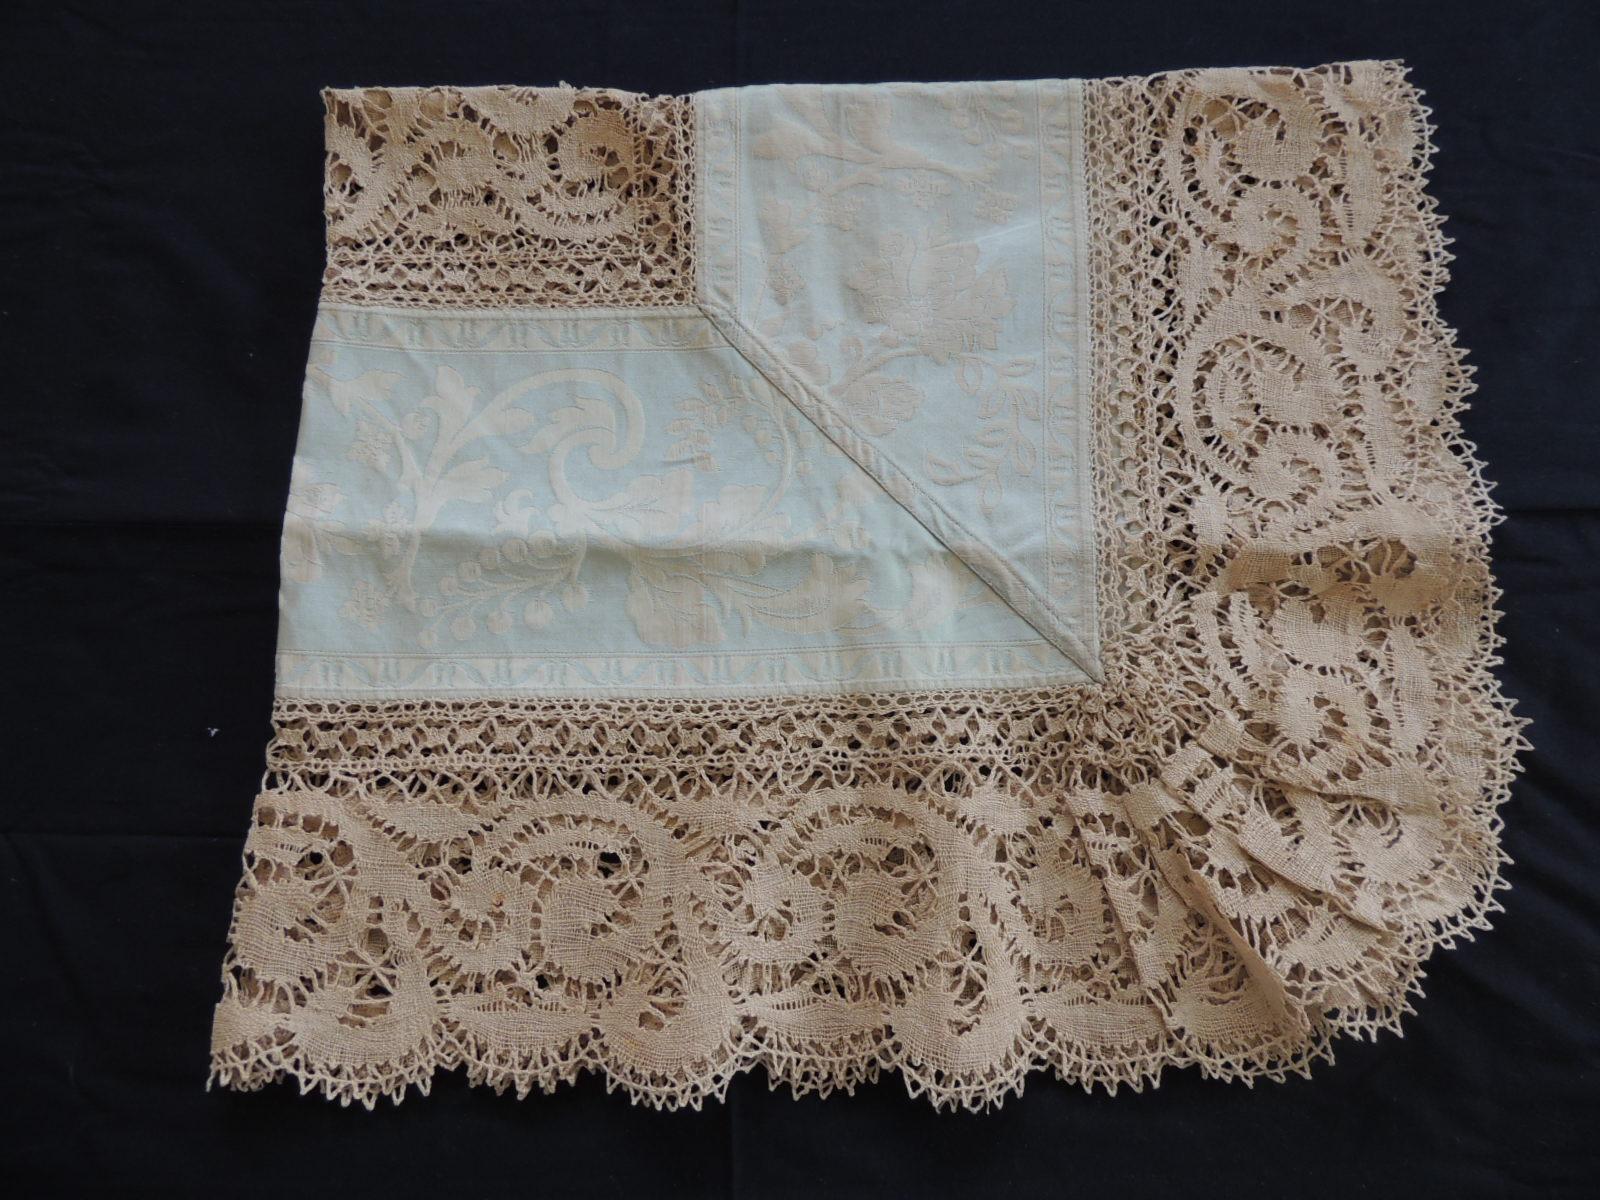 Bobbin lace and damask pillow topper with large lace center panel.
Ruffle lace edges border is about 5.5